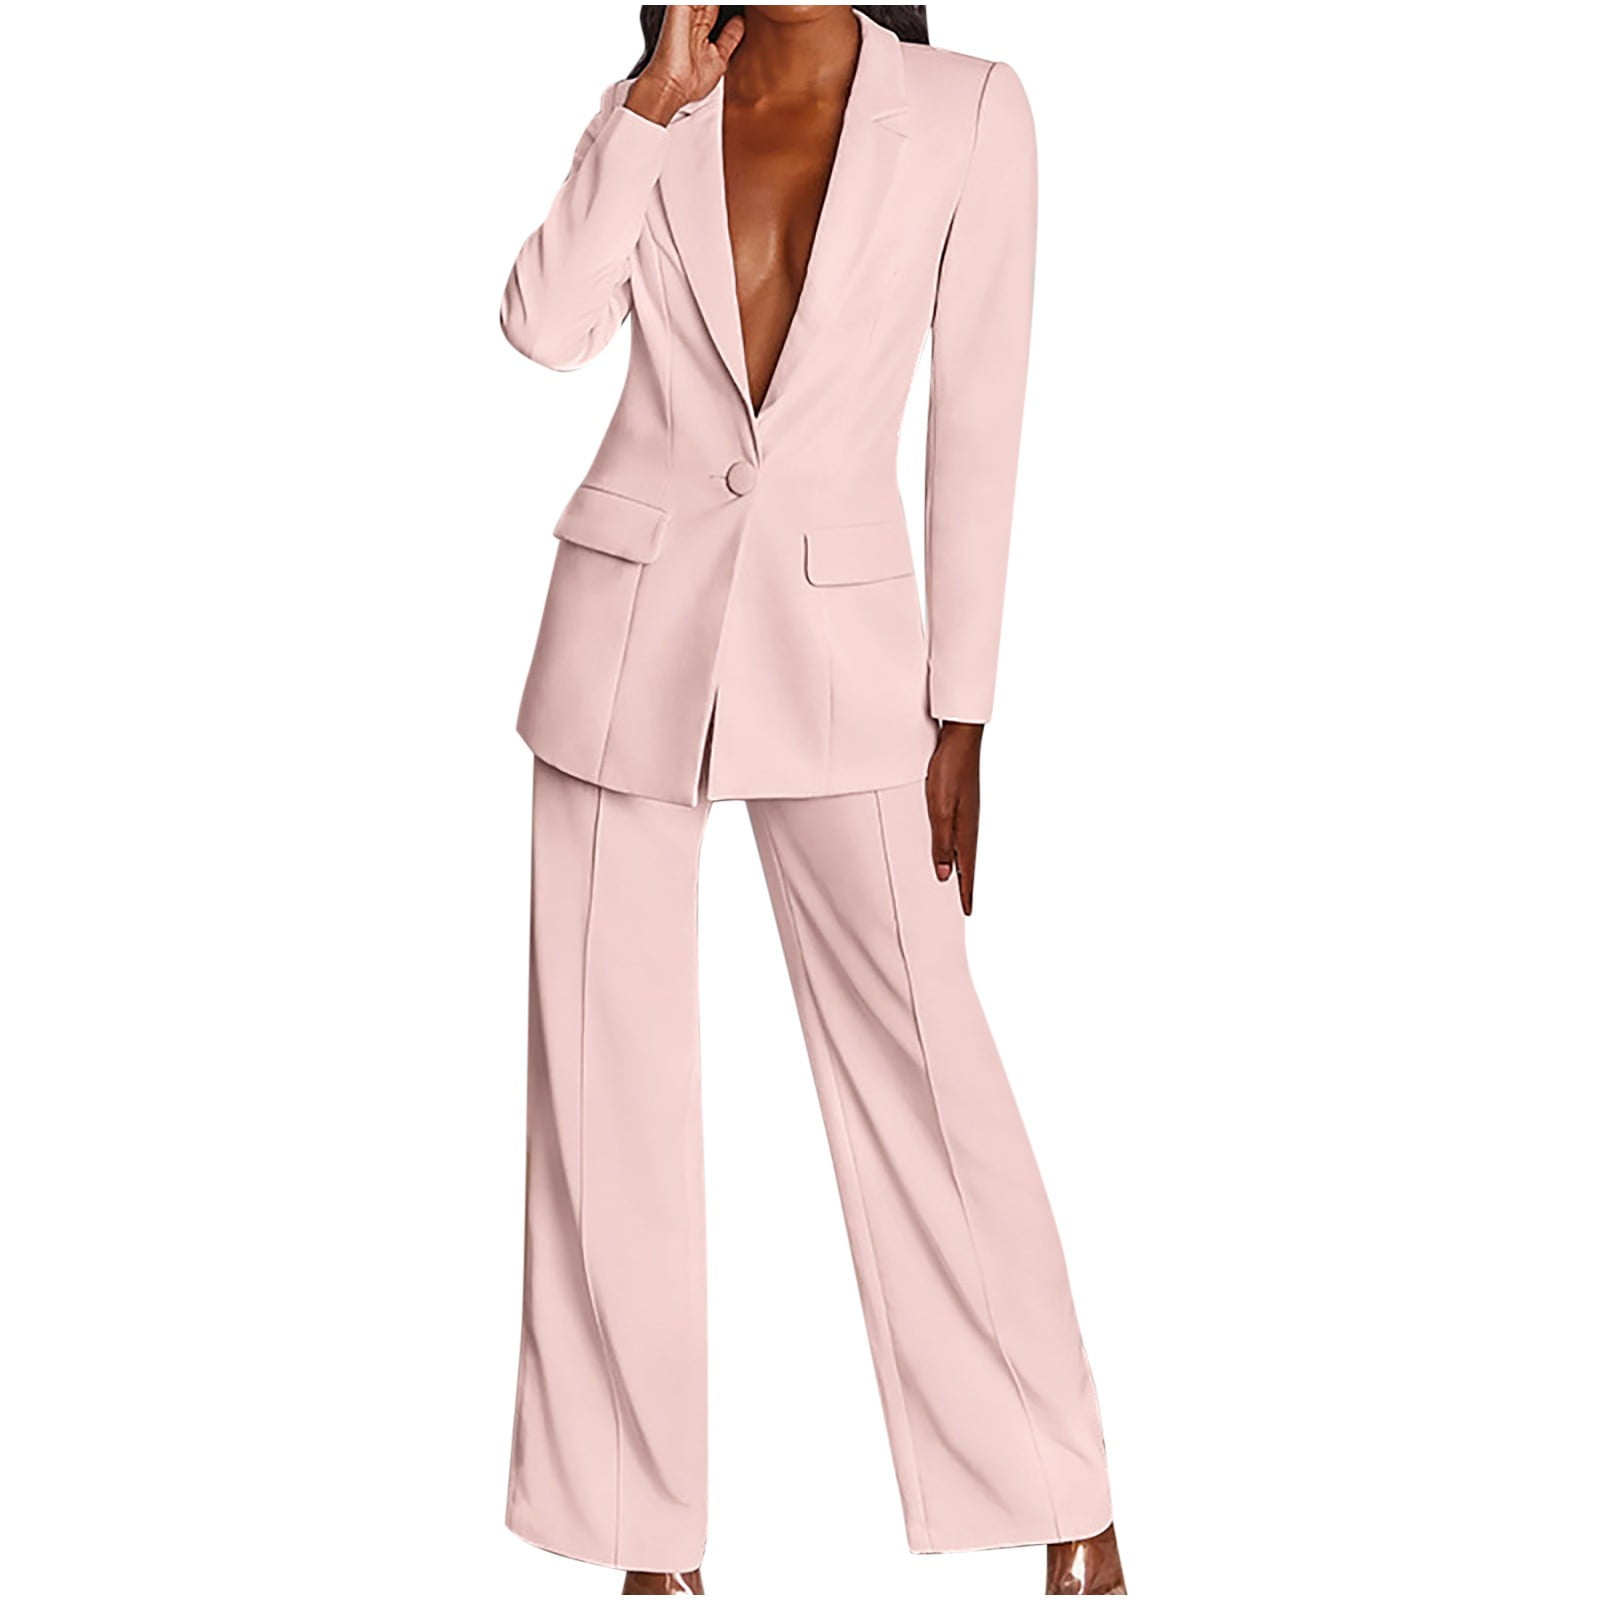 Women's 2 Piece Outfit Long Sleeve Buttons Stylish Blazer Wide Leg Pants  Dressy Pure Color Business Matching Sets